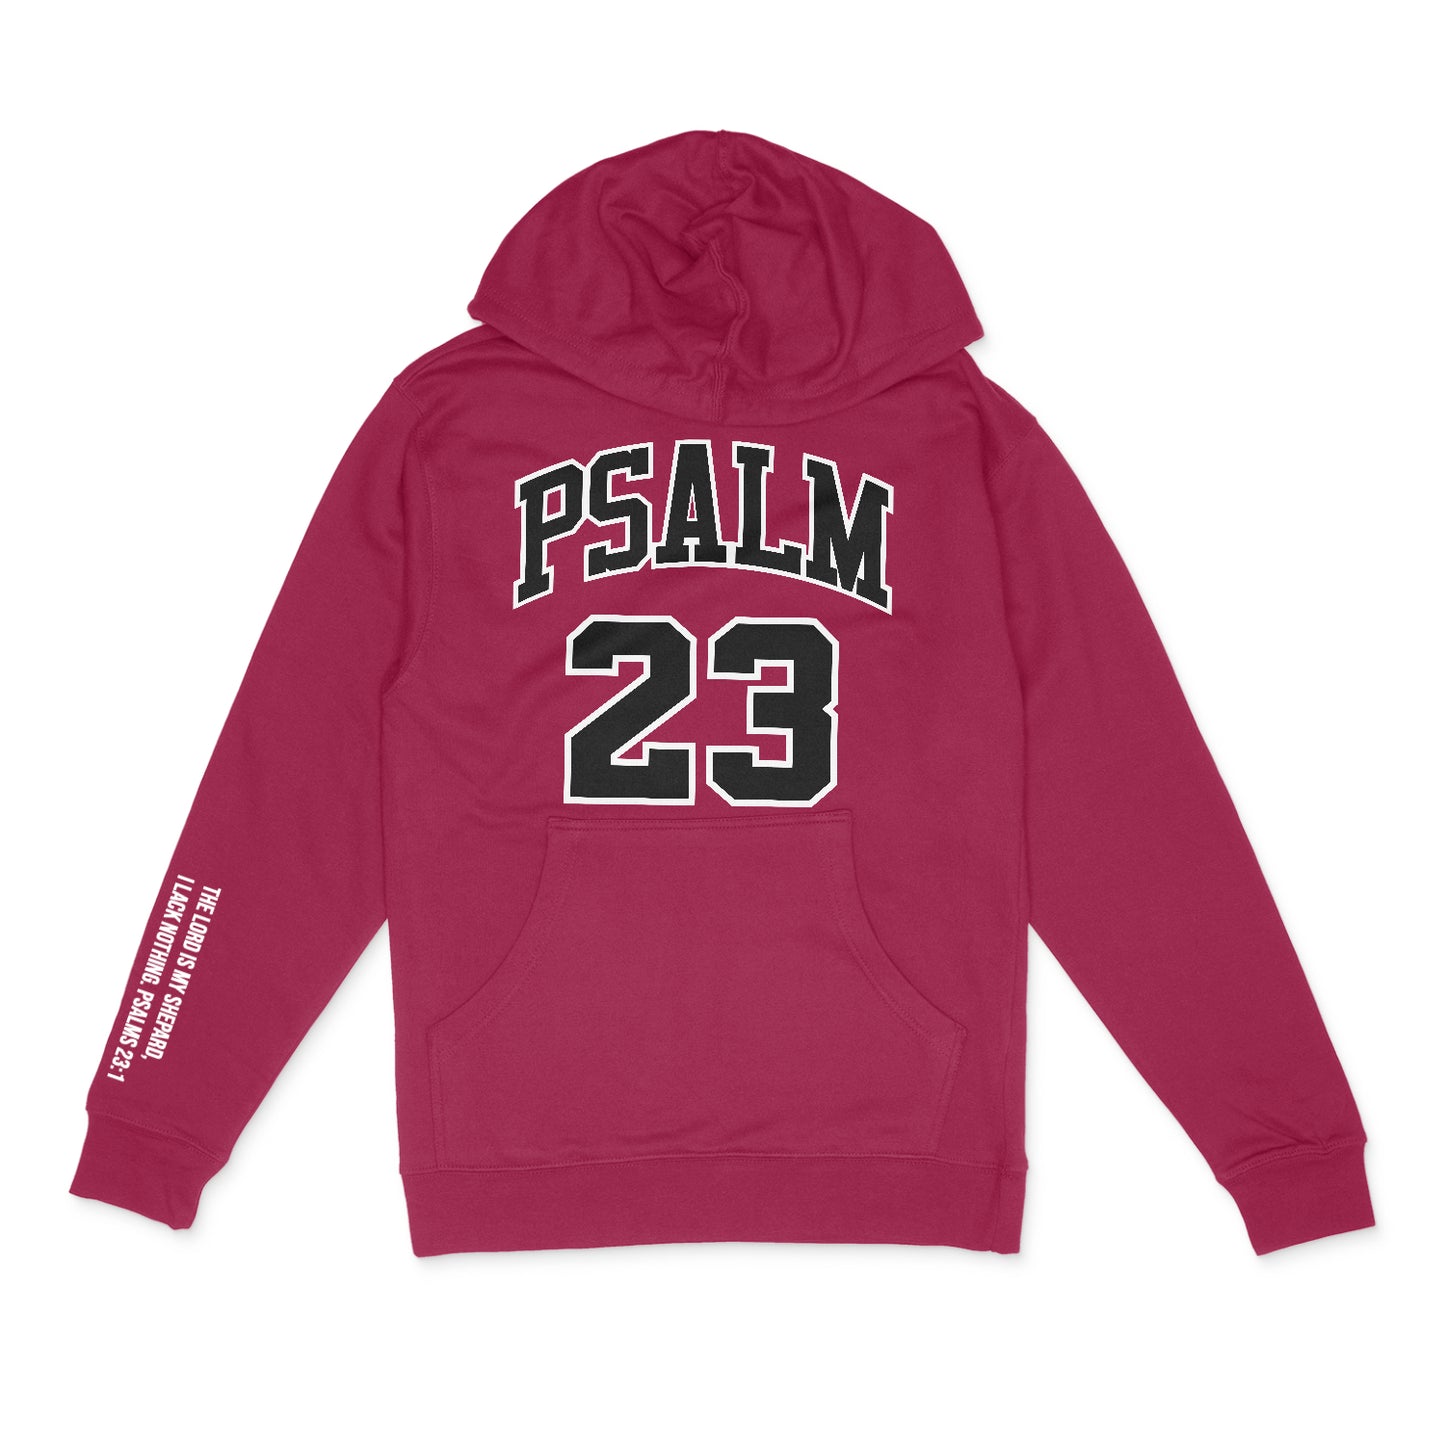 "Psalm 23" Hoodie (Red)